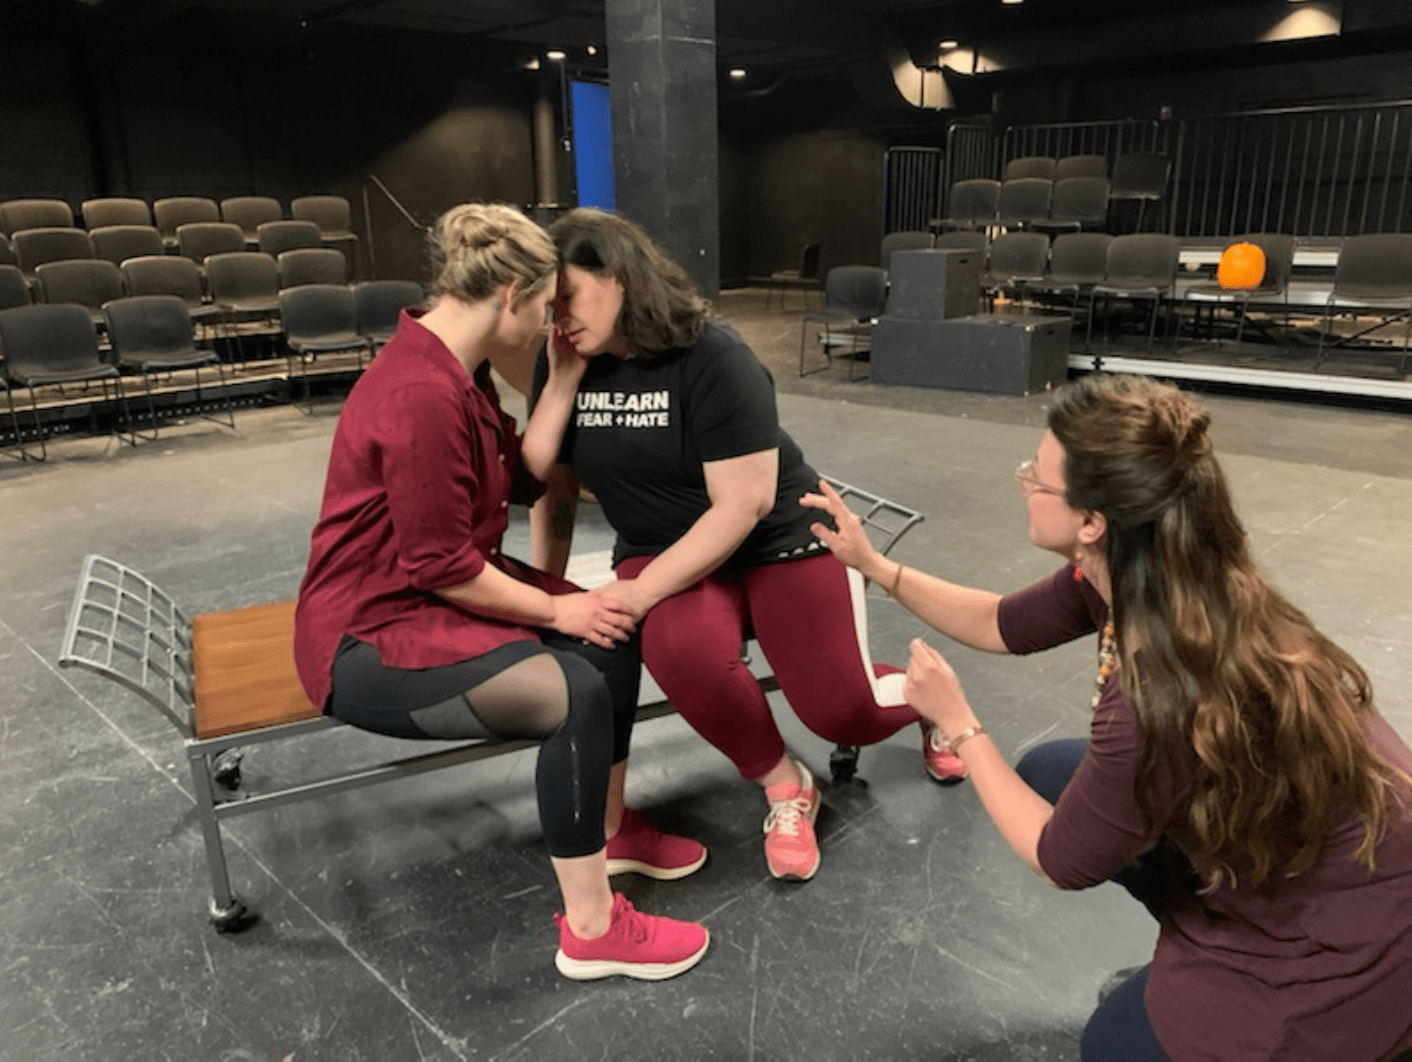 Alexis Black directs two women in a black box theatre through an intimate scene